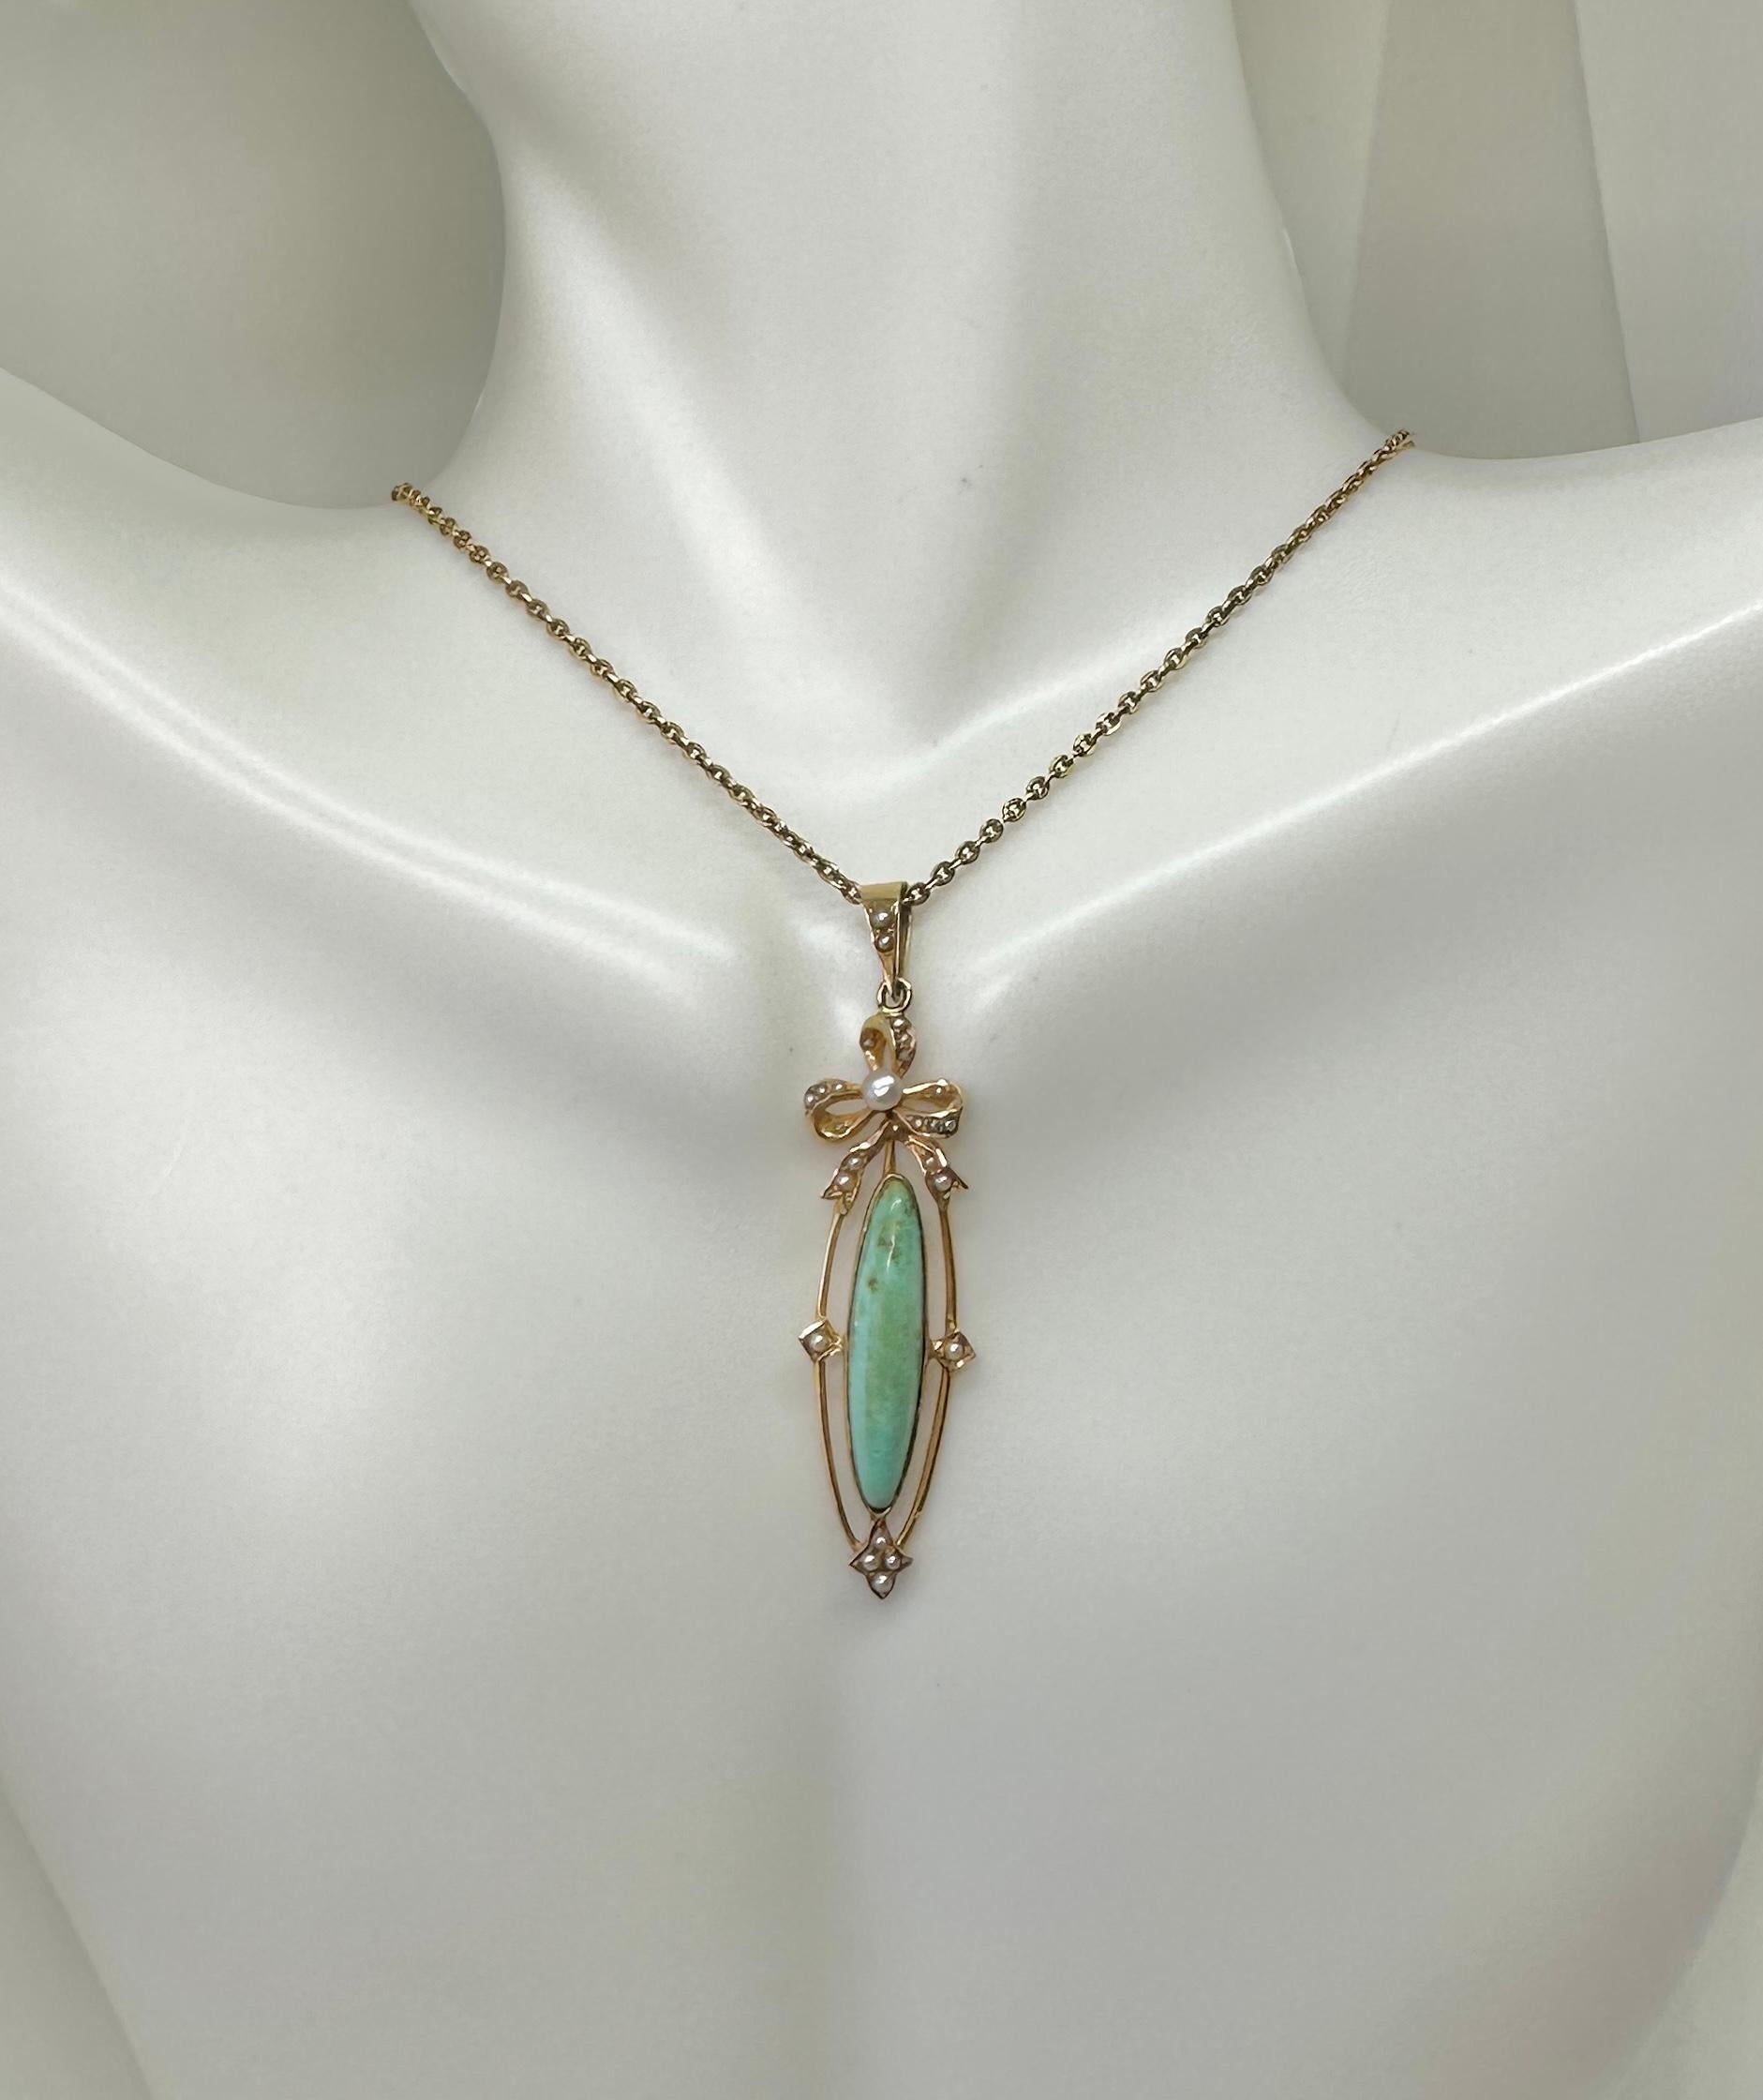 This is a stunning Victorian Antique 14 Karat Gold Turquoise and Pearl Bow Motif pendant and necklace chain. The pendant features a gorgeous long oval turquoise cabochon.  The turquoise is set in an open work design surrounded by pearls with a pearl